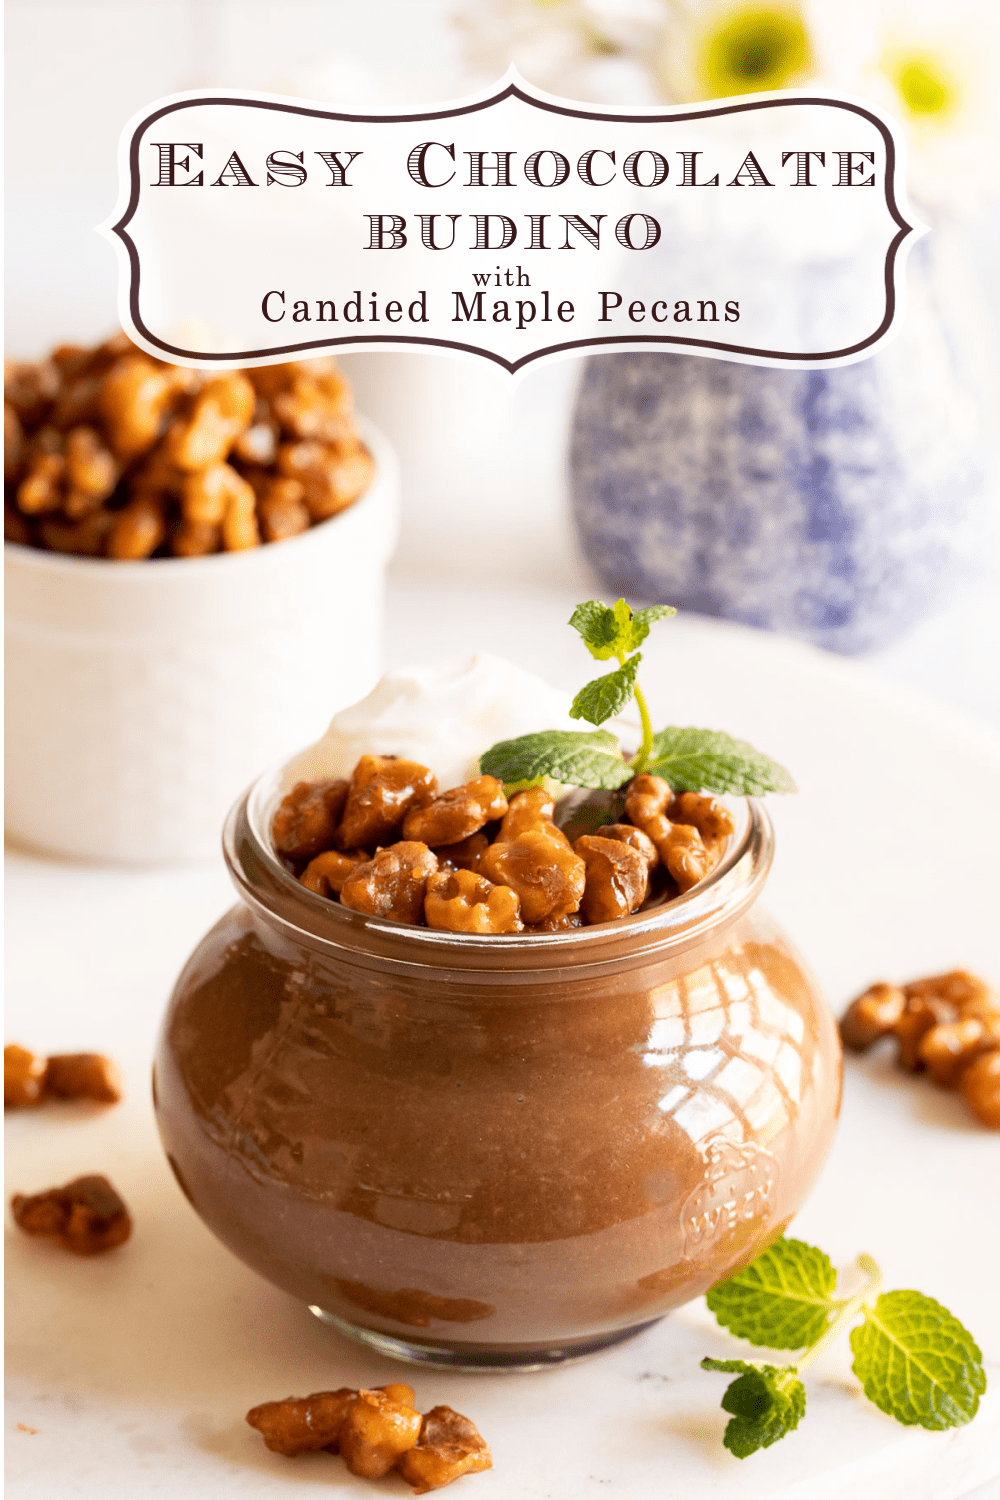 Easy Chocolate Budino with Candied Maple Walnuts